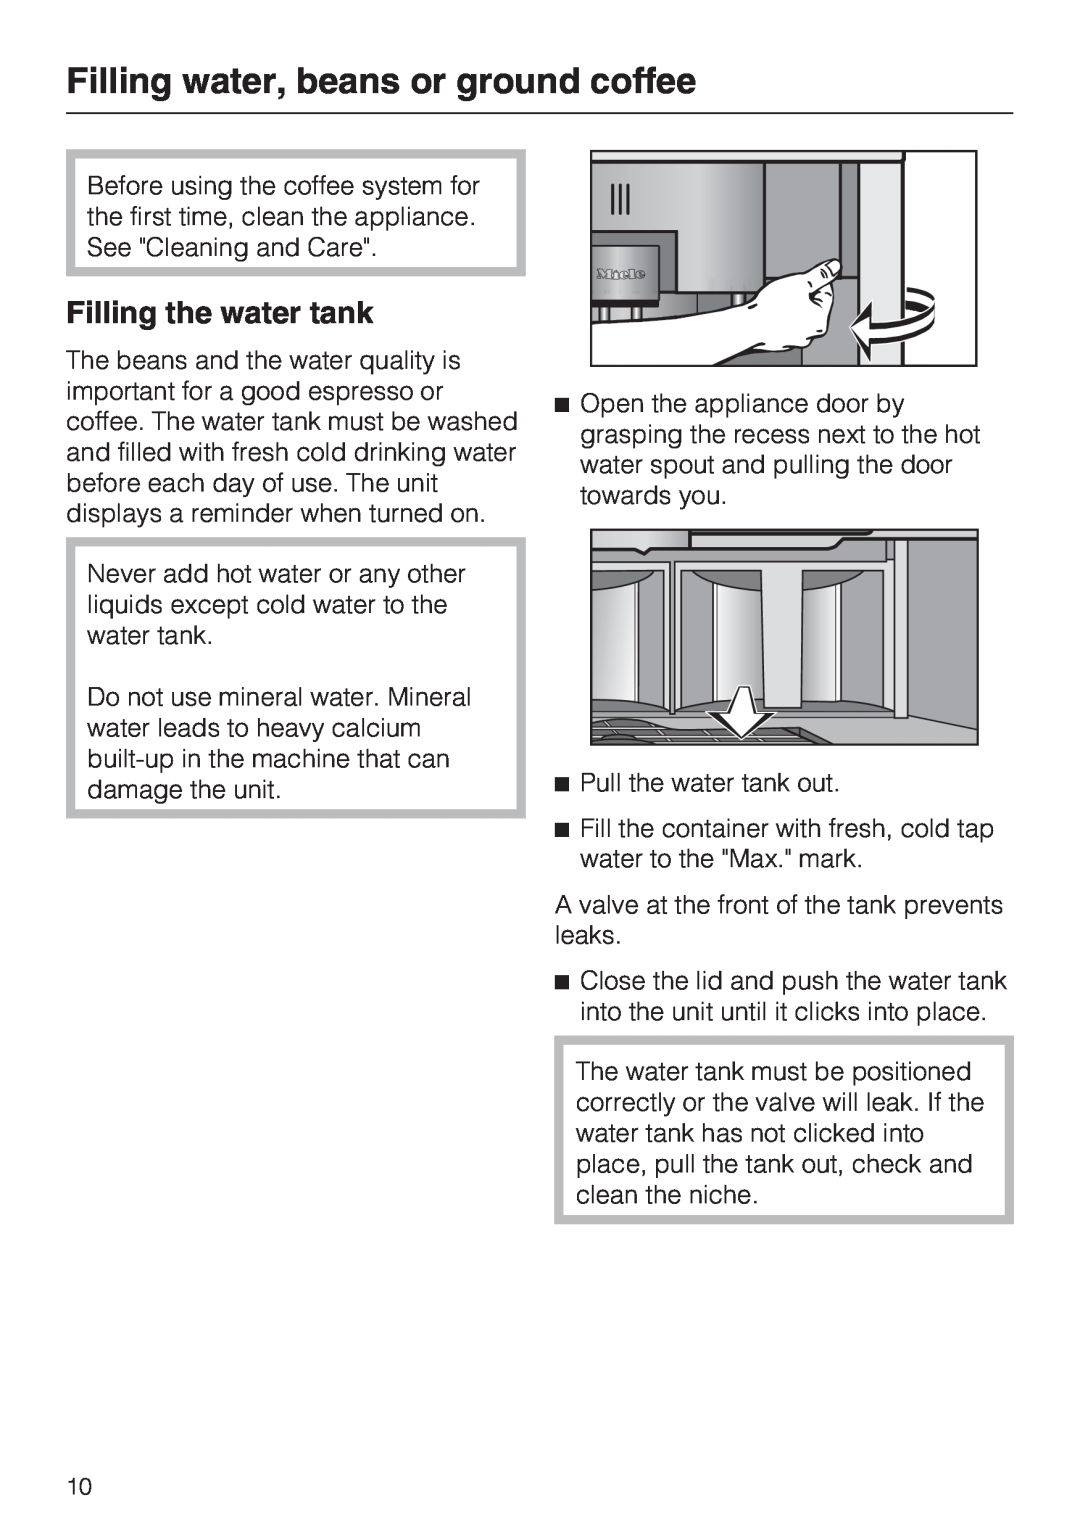 Miele CVA 4070 installation instructions Filling water, beans or ground coffee, Filling the water tank 